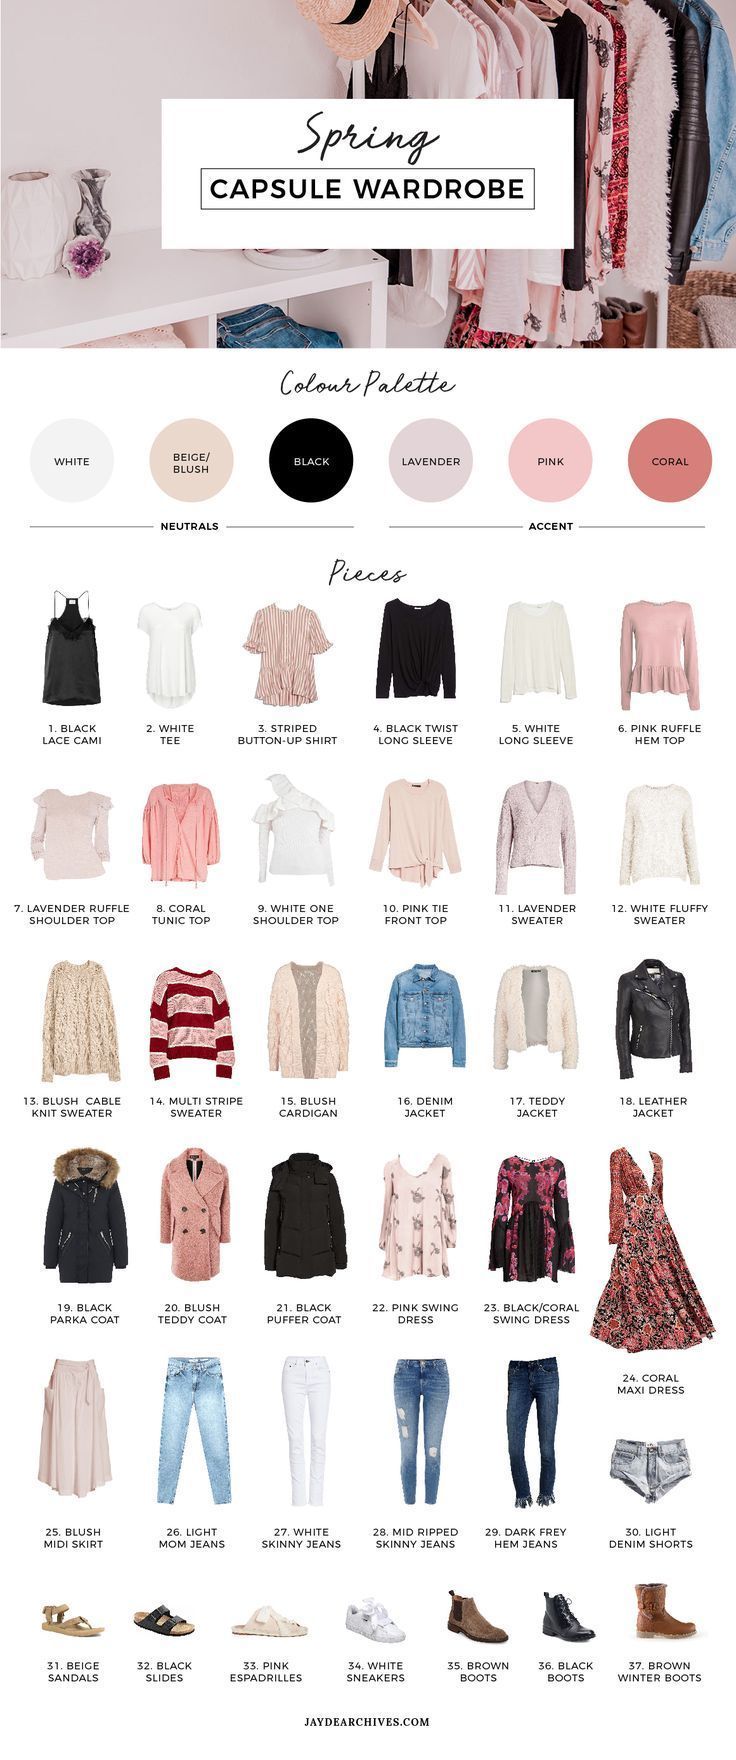 Fashion infographic : My 18' Spring Capsule Wardrobe - InfographicNow ...